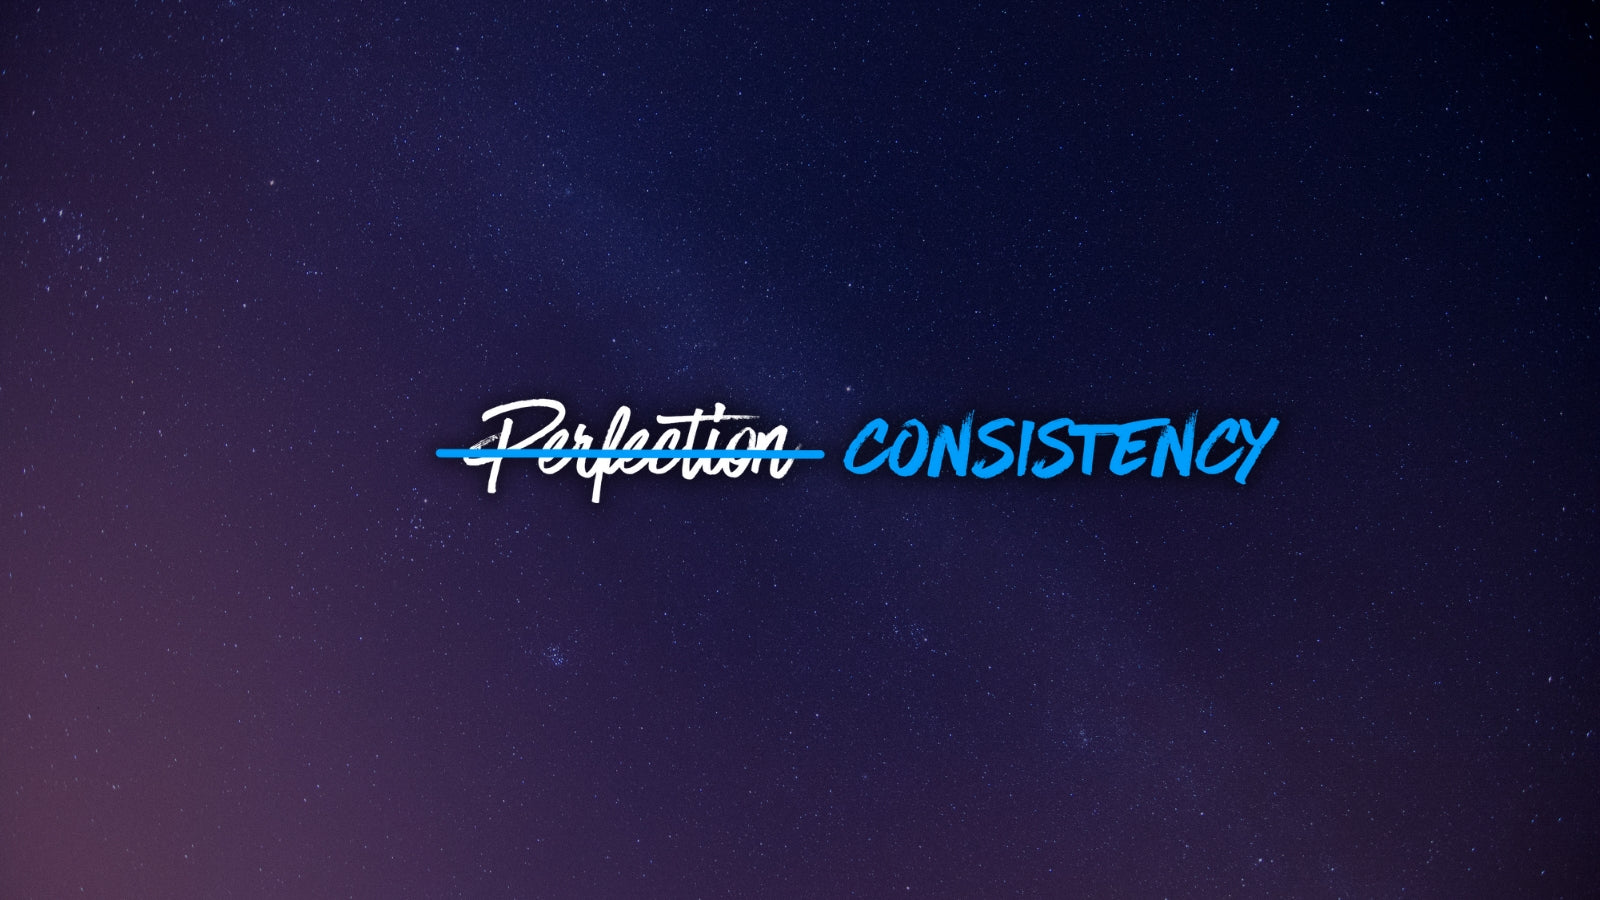 Consistency over perfection blog post cover image